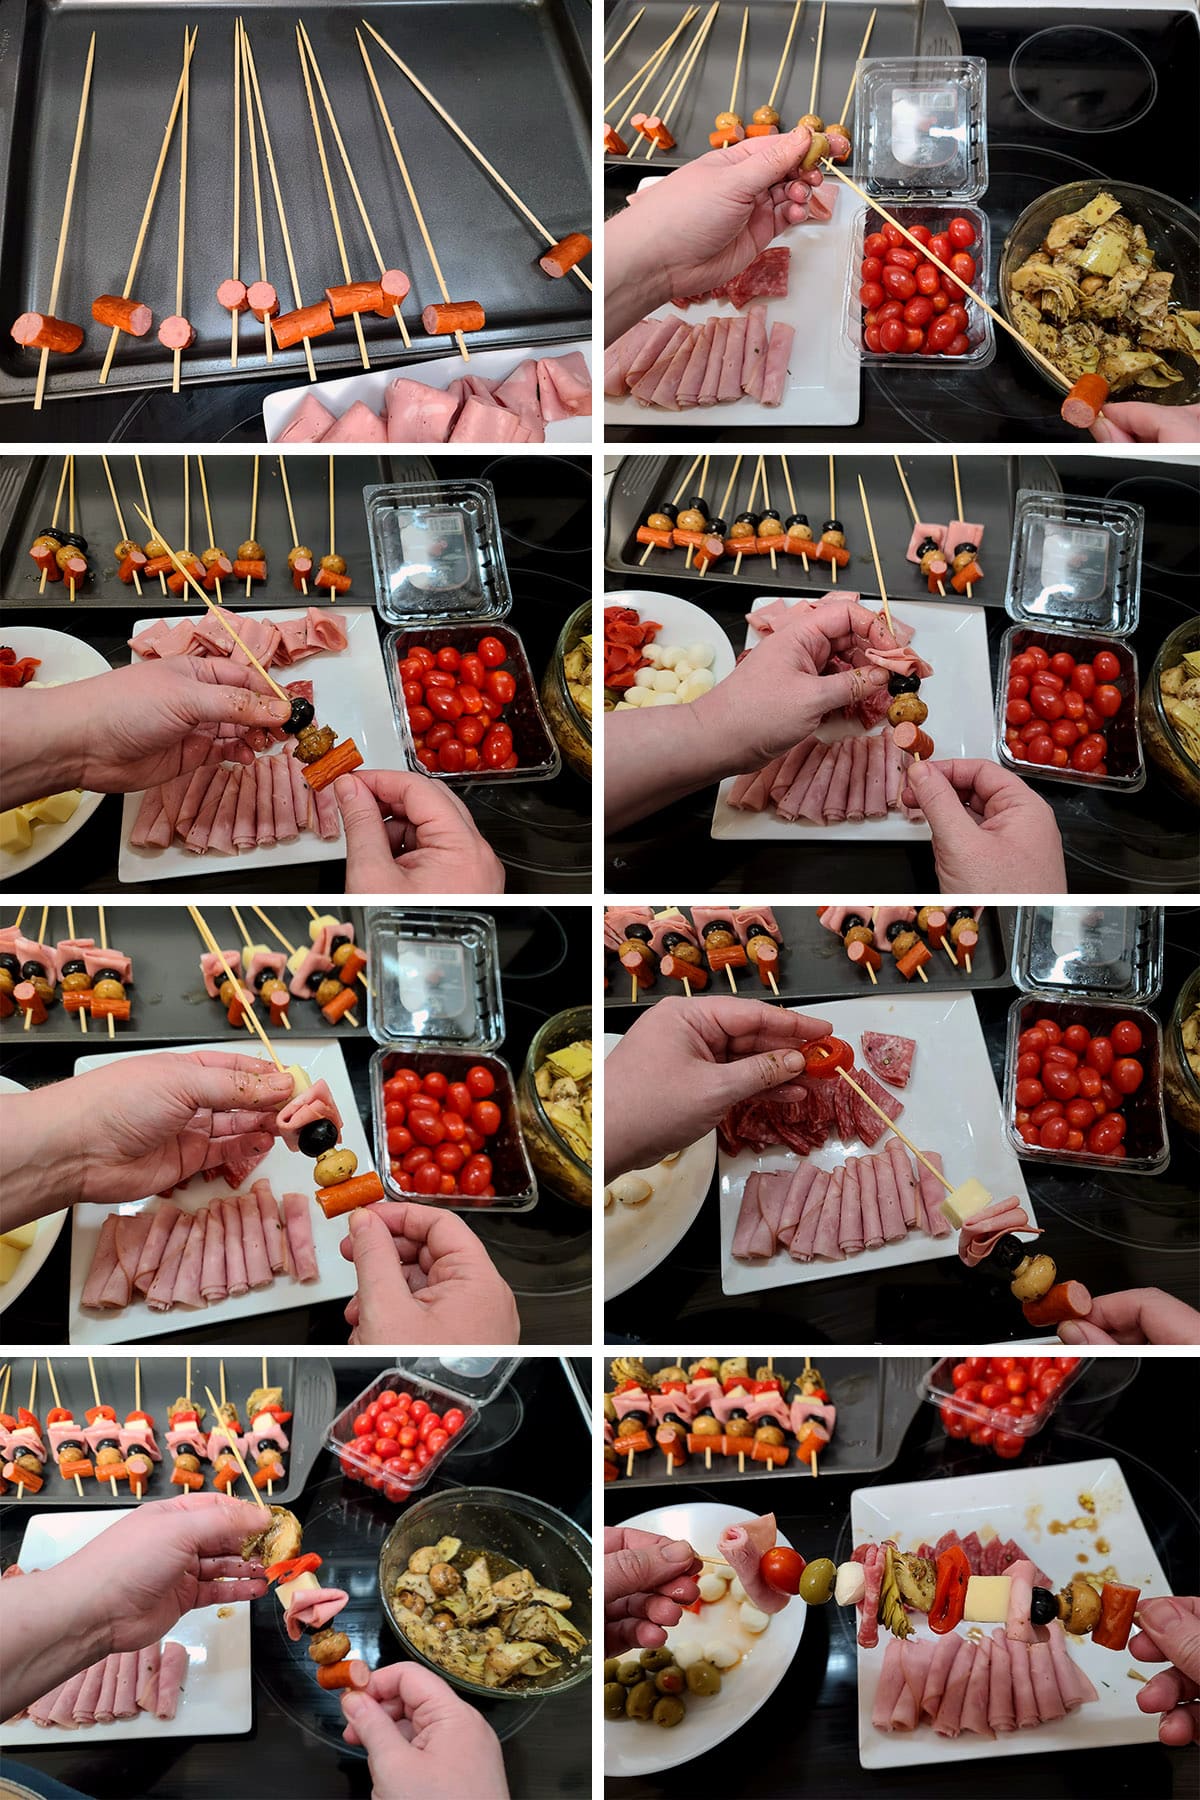 An 8 part image showing the various meats, cheeses, olives, and marinated vegetables being threaded onto skewers.